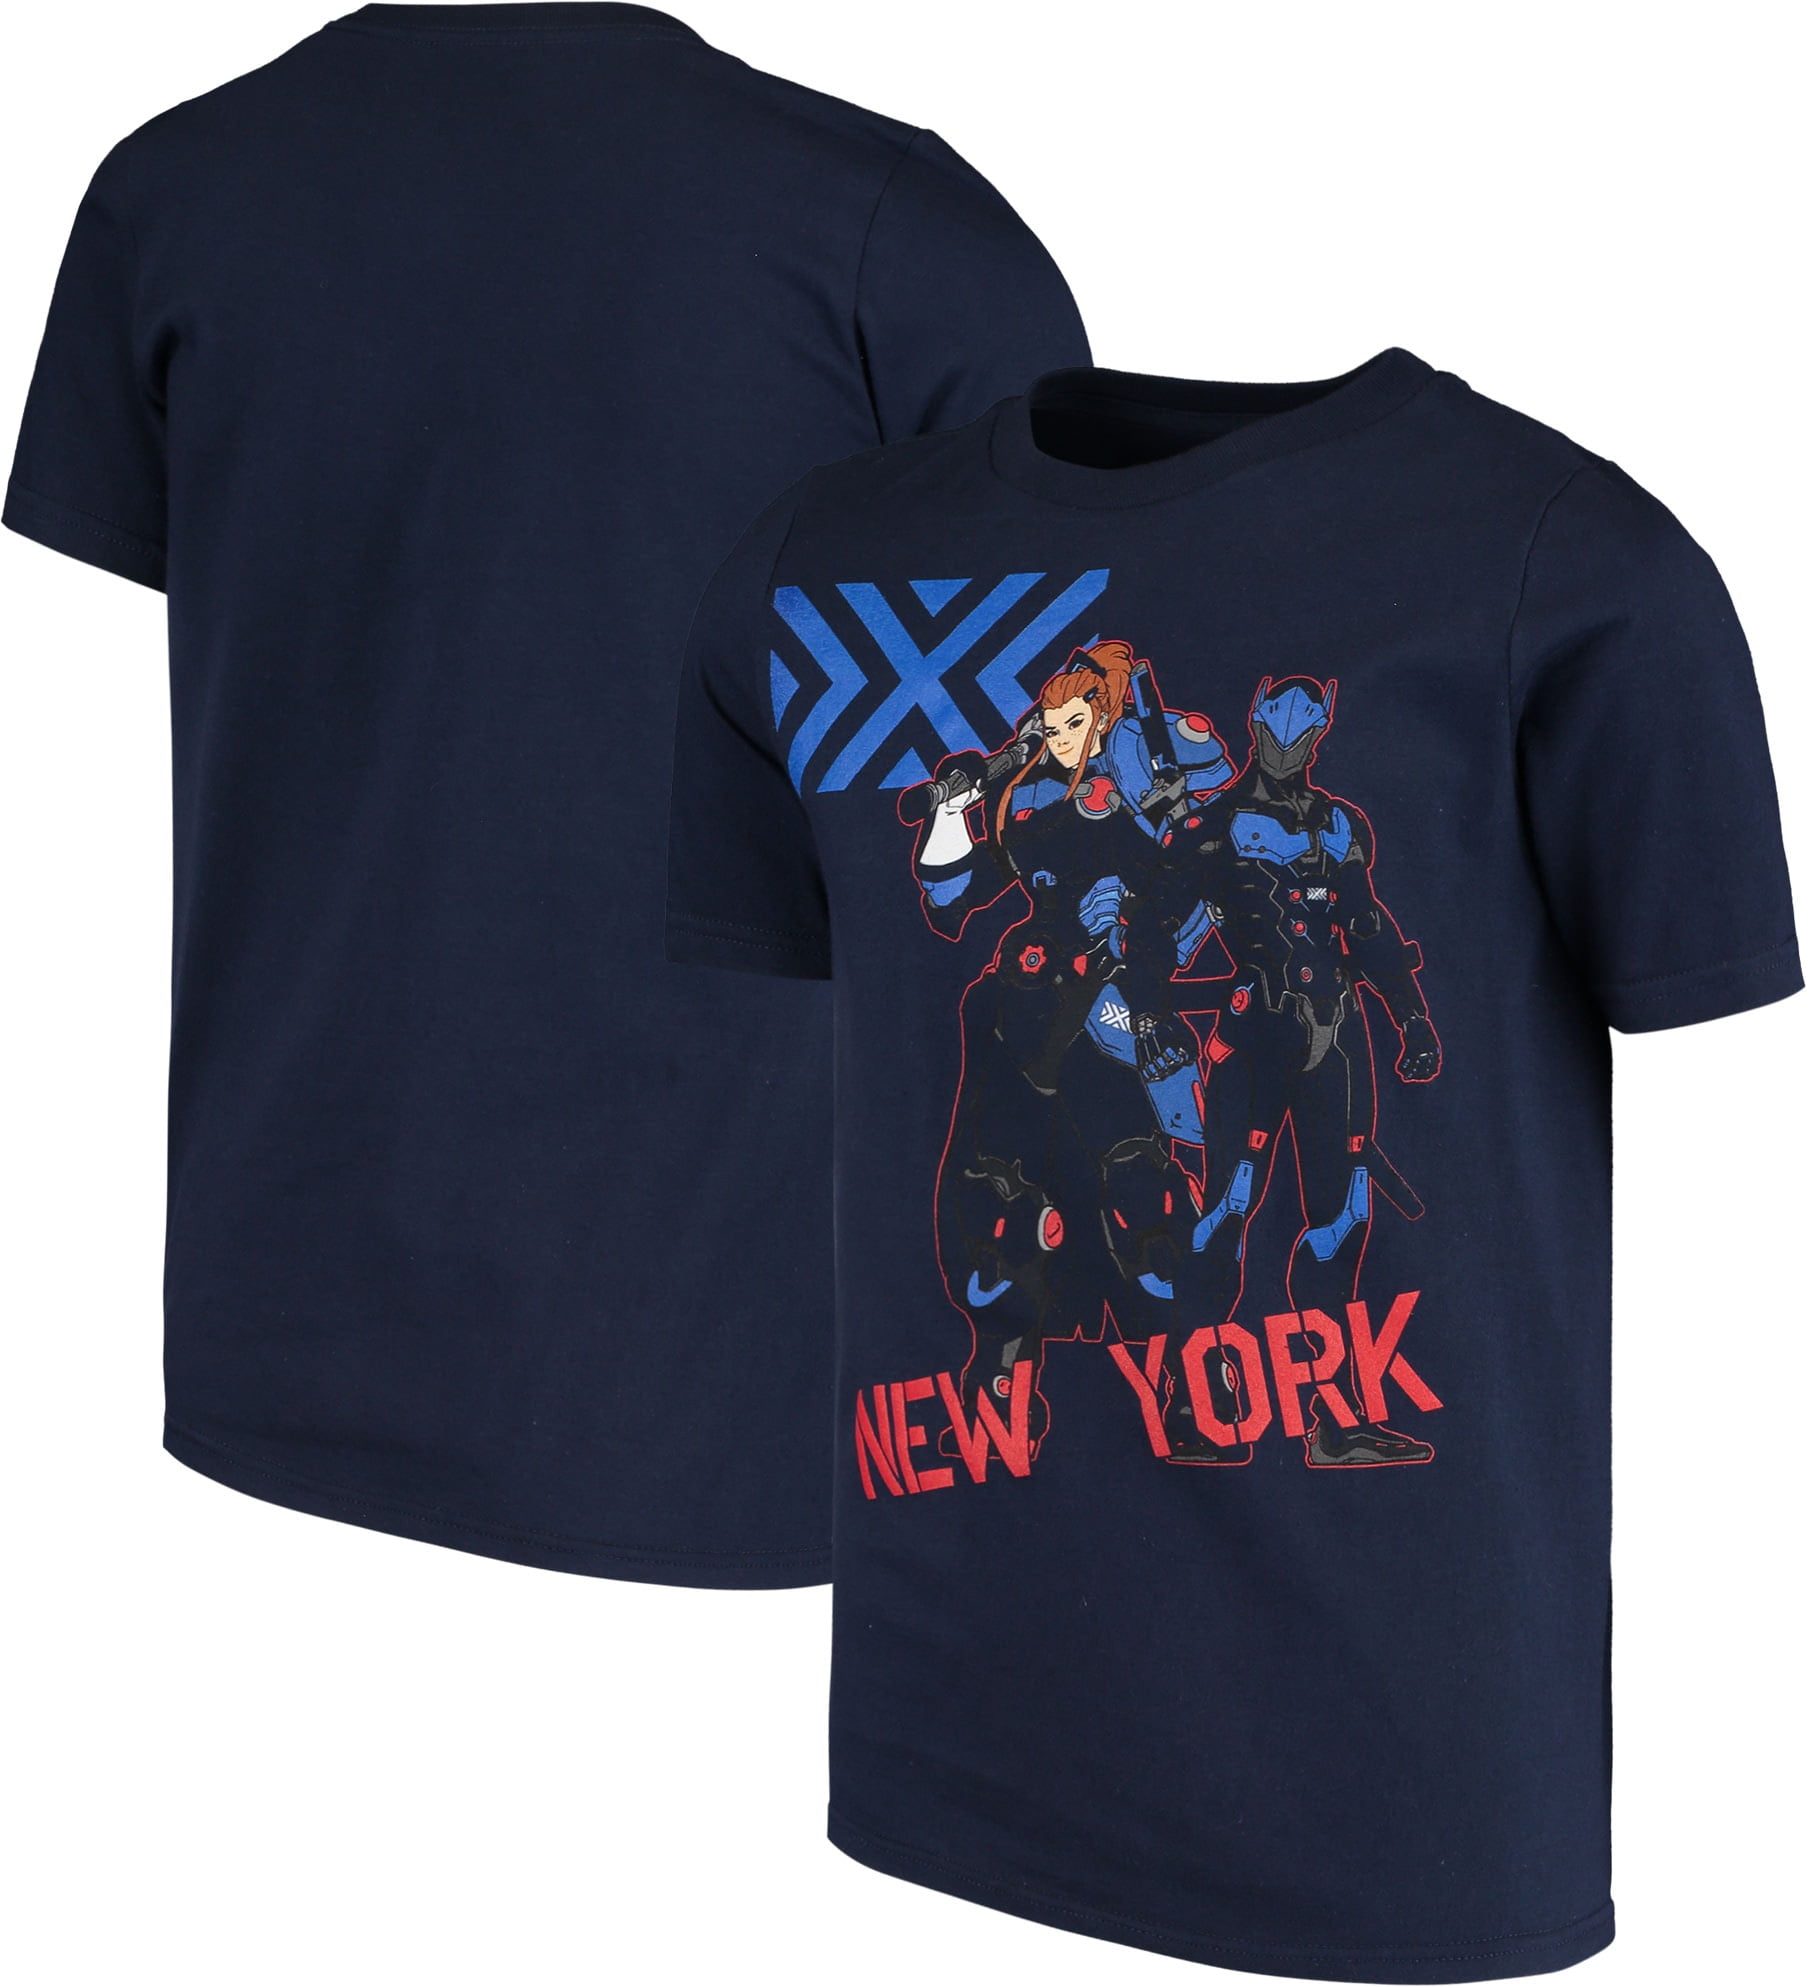 Youth Navy New York Excelsior Heroic T-Shirt